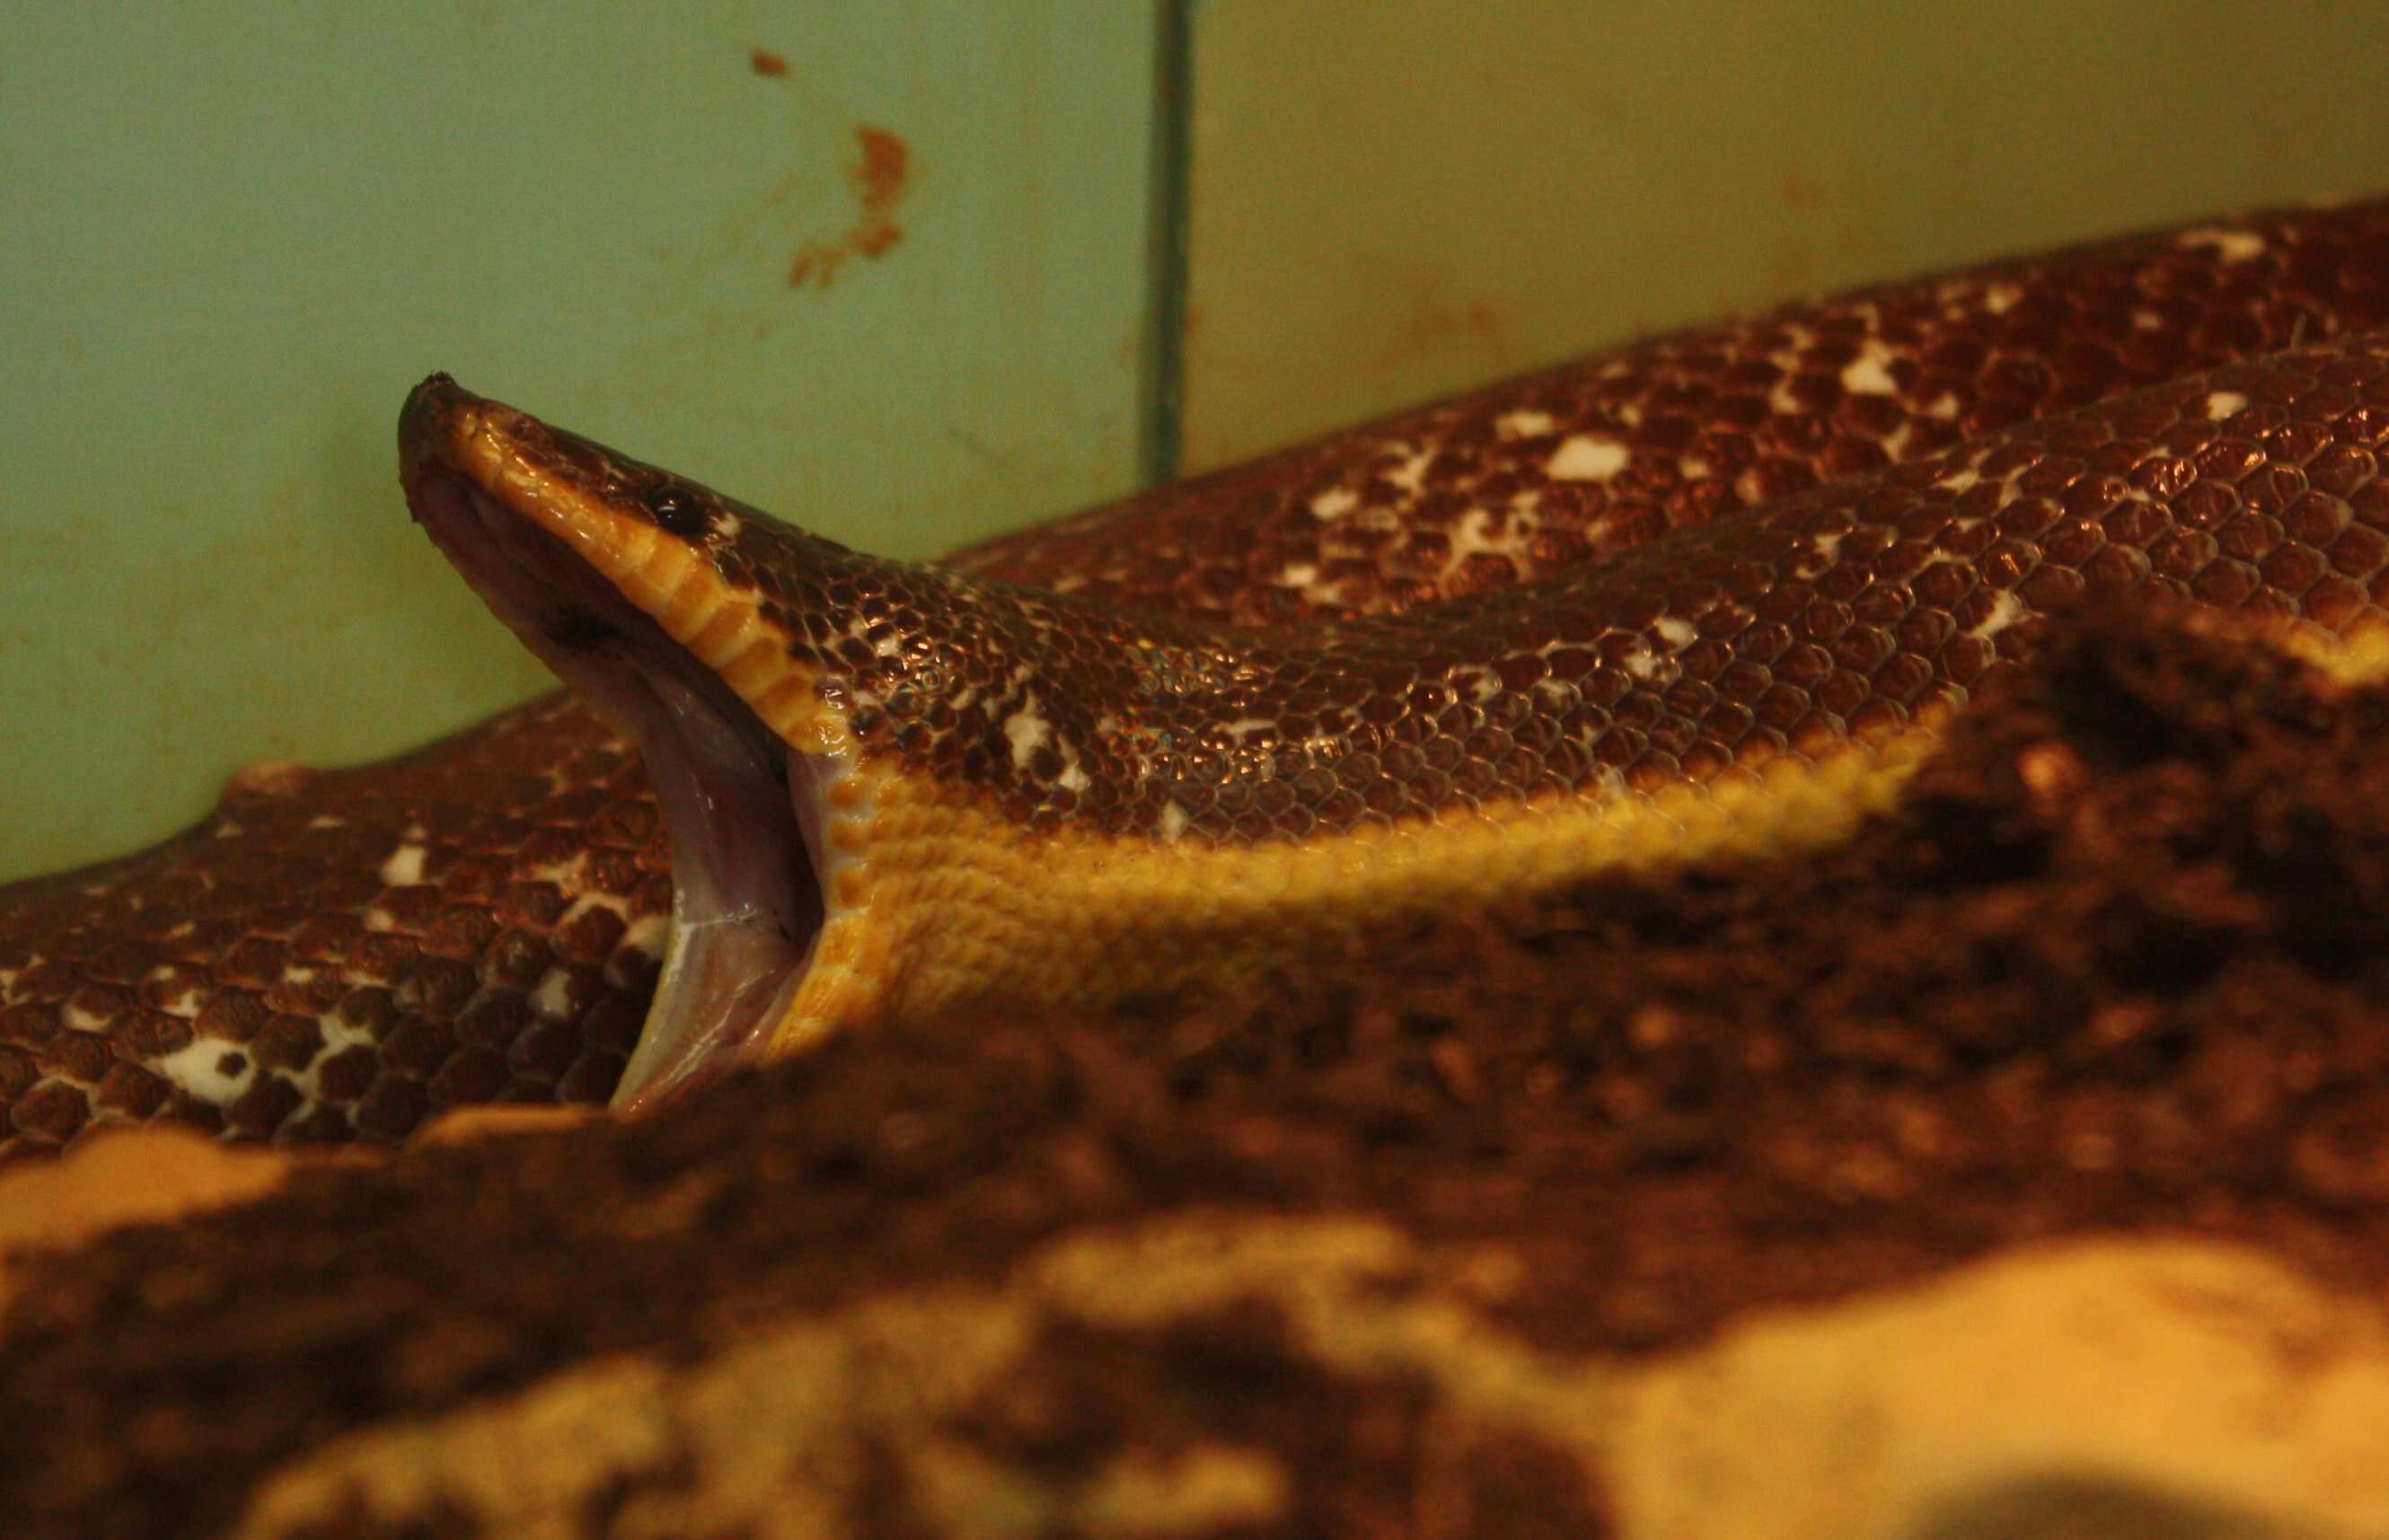 Image of Mexican burrowing pythons